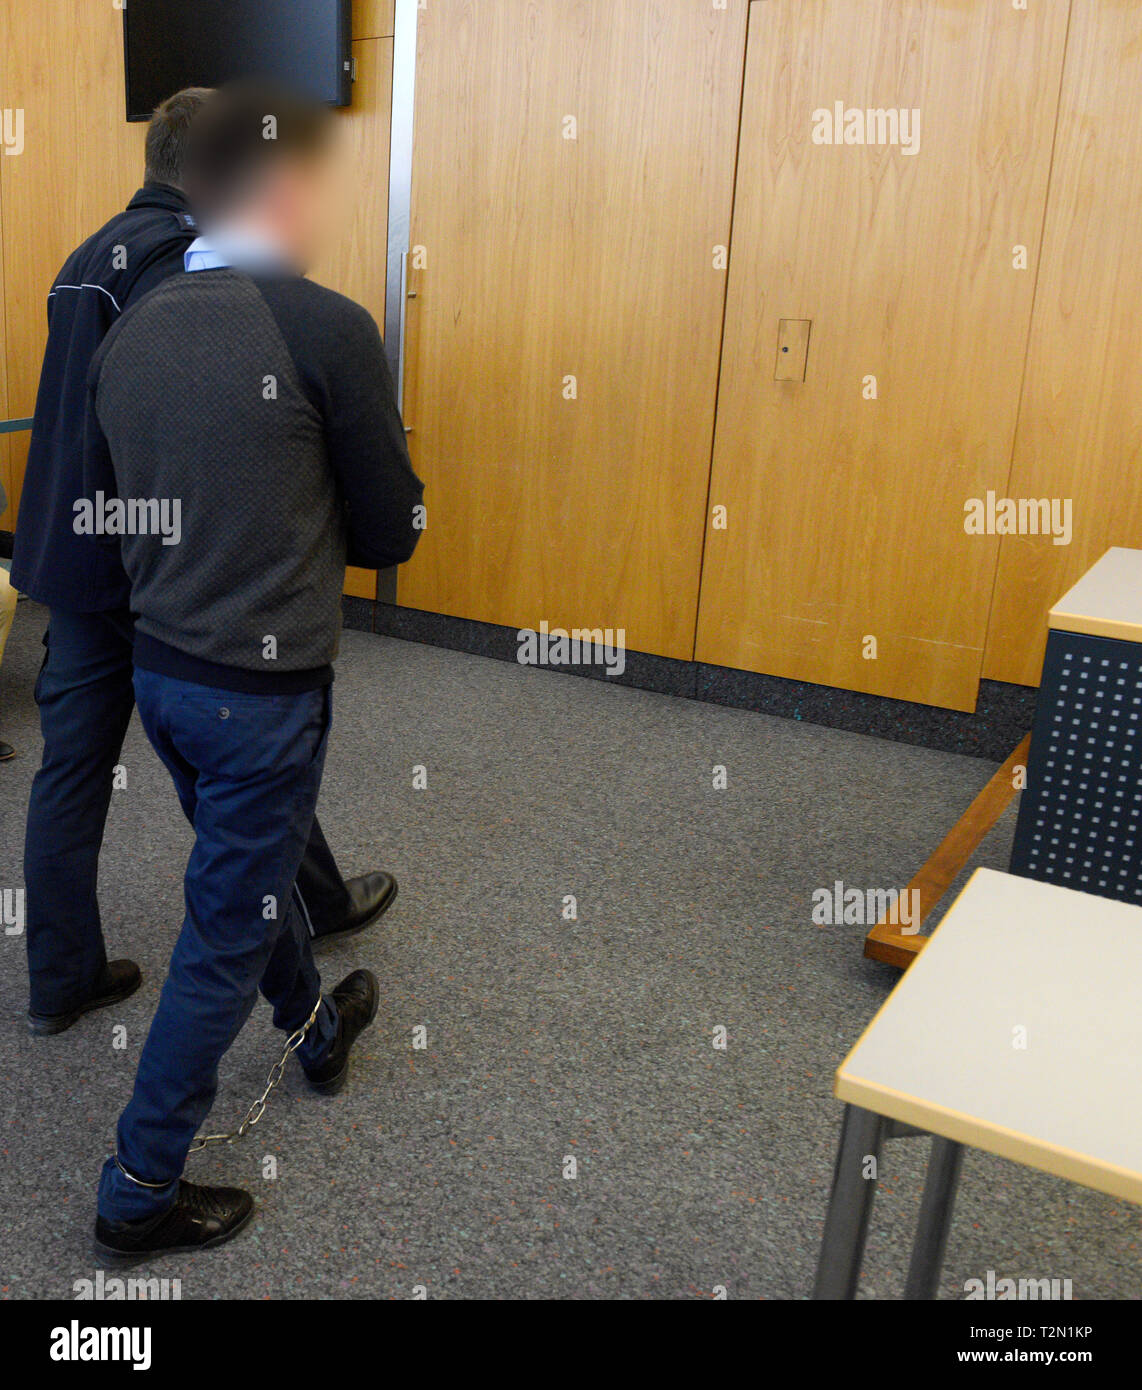 02 April 2019, Baden-Wuerttemberg, Ulm: In the district court, a judicial watchman (l) presents the accused, who is tied to his hands and feet. About two years after the murder of a young Albanian in Germany, the Ulm Regional Court announced the verdict. The accused, who is also of Albanian origin, is said to have played a central role in the murder of the victim, according to the public prosecutor's office. The motive was an archaic 'blood revenge' in the course of a feud between hostile families in Albania. The court sentenced the accused to life imprisonment for murder. Photo: Stefan Puchne Stock Photo